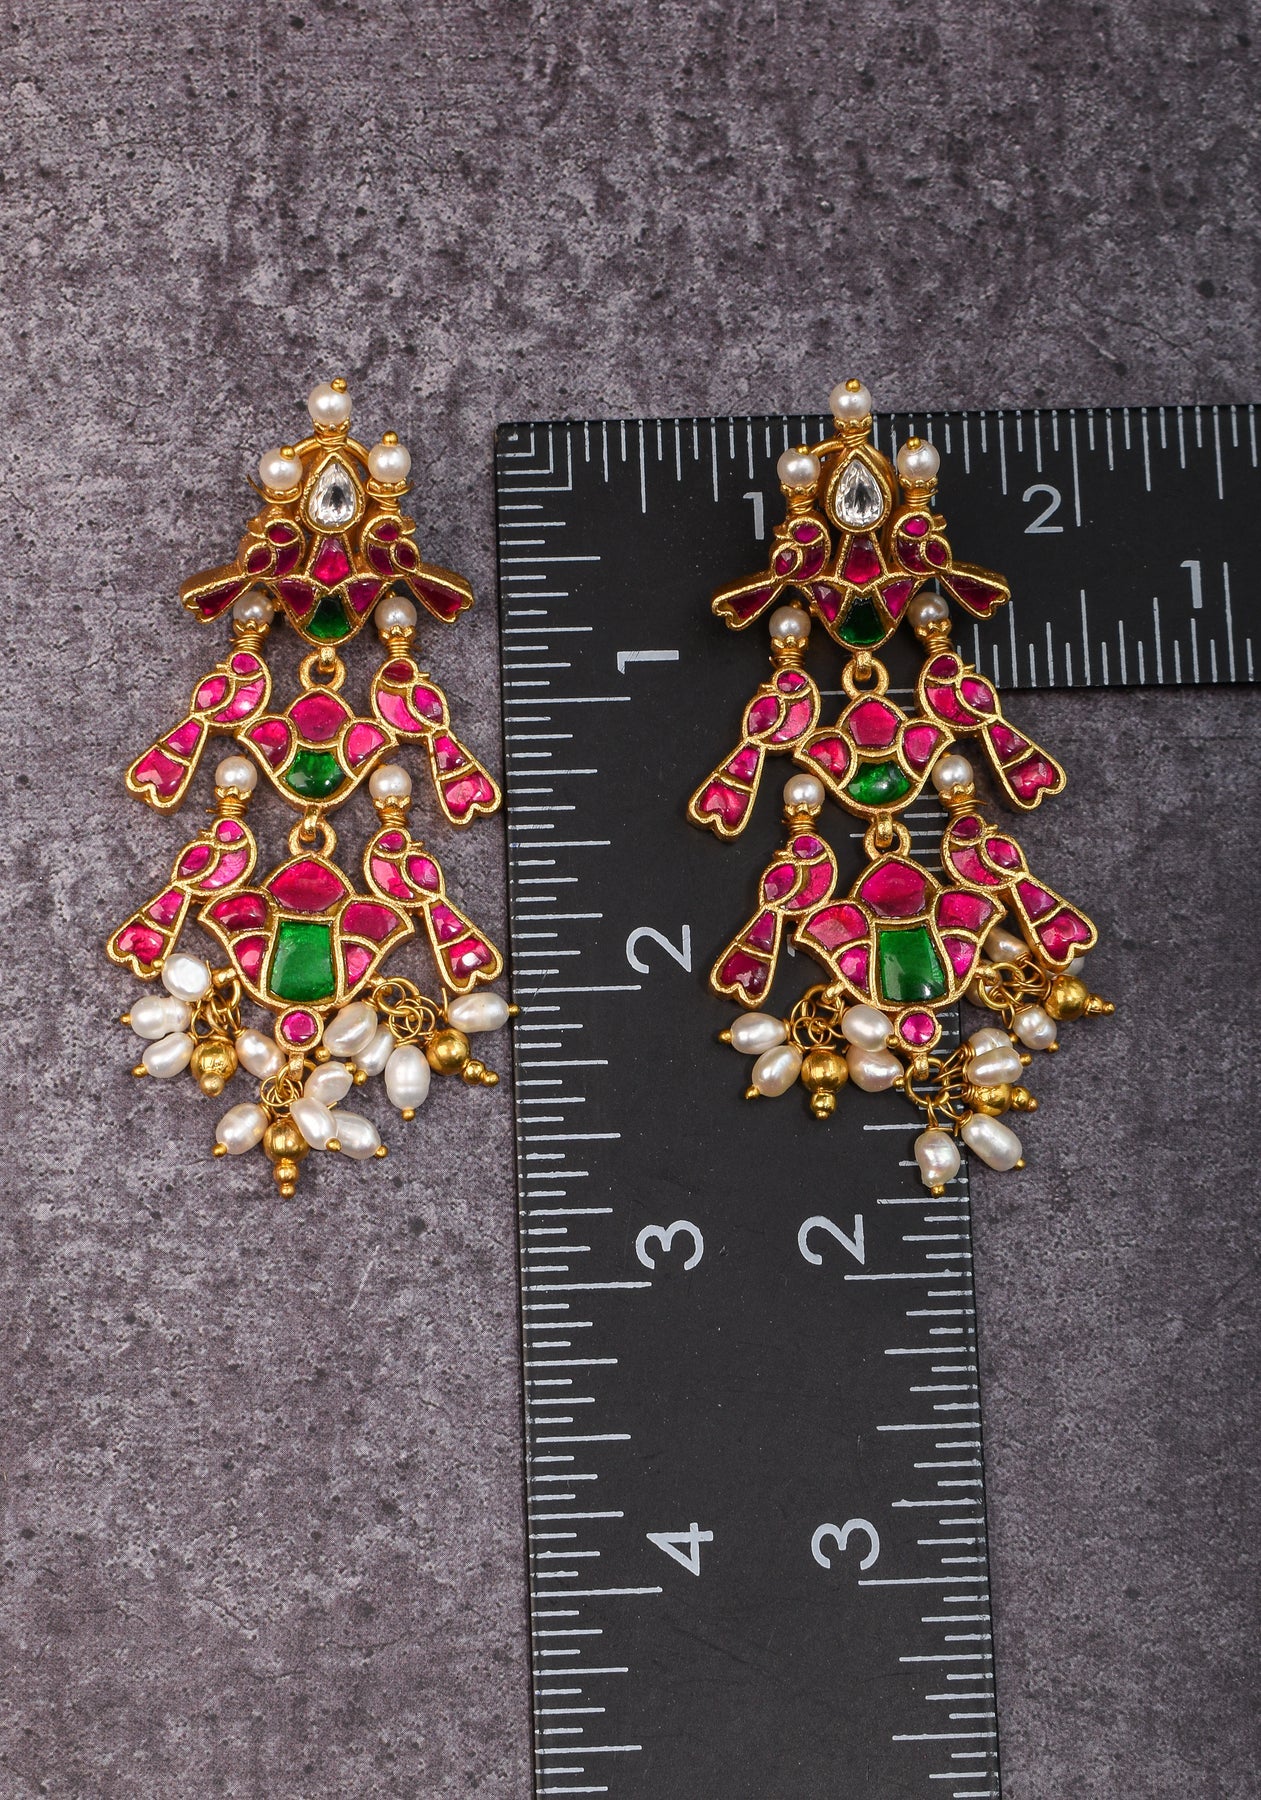 2.75" Layered Pink & Green Stone Peacock Earrings with Dangling White Beads